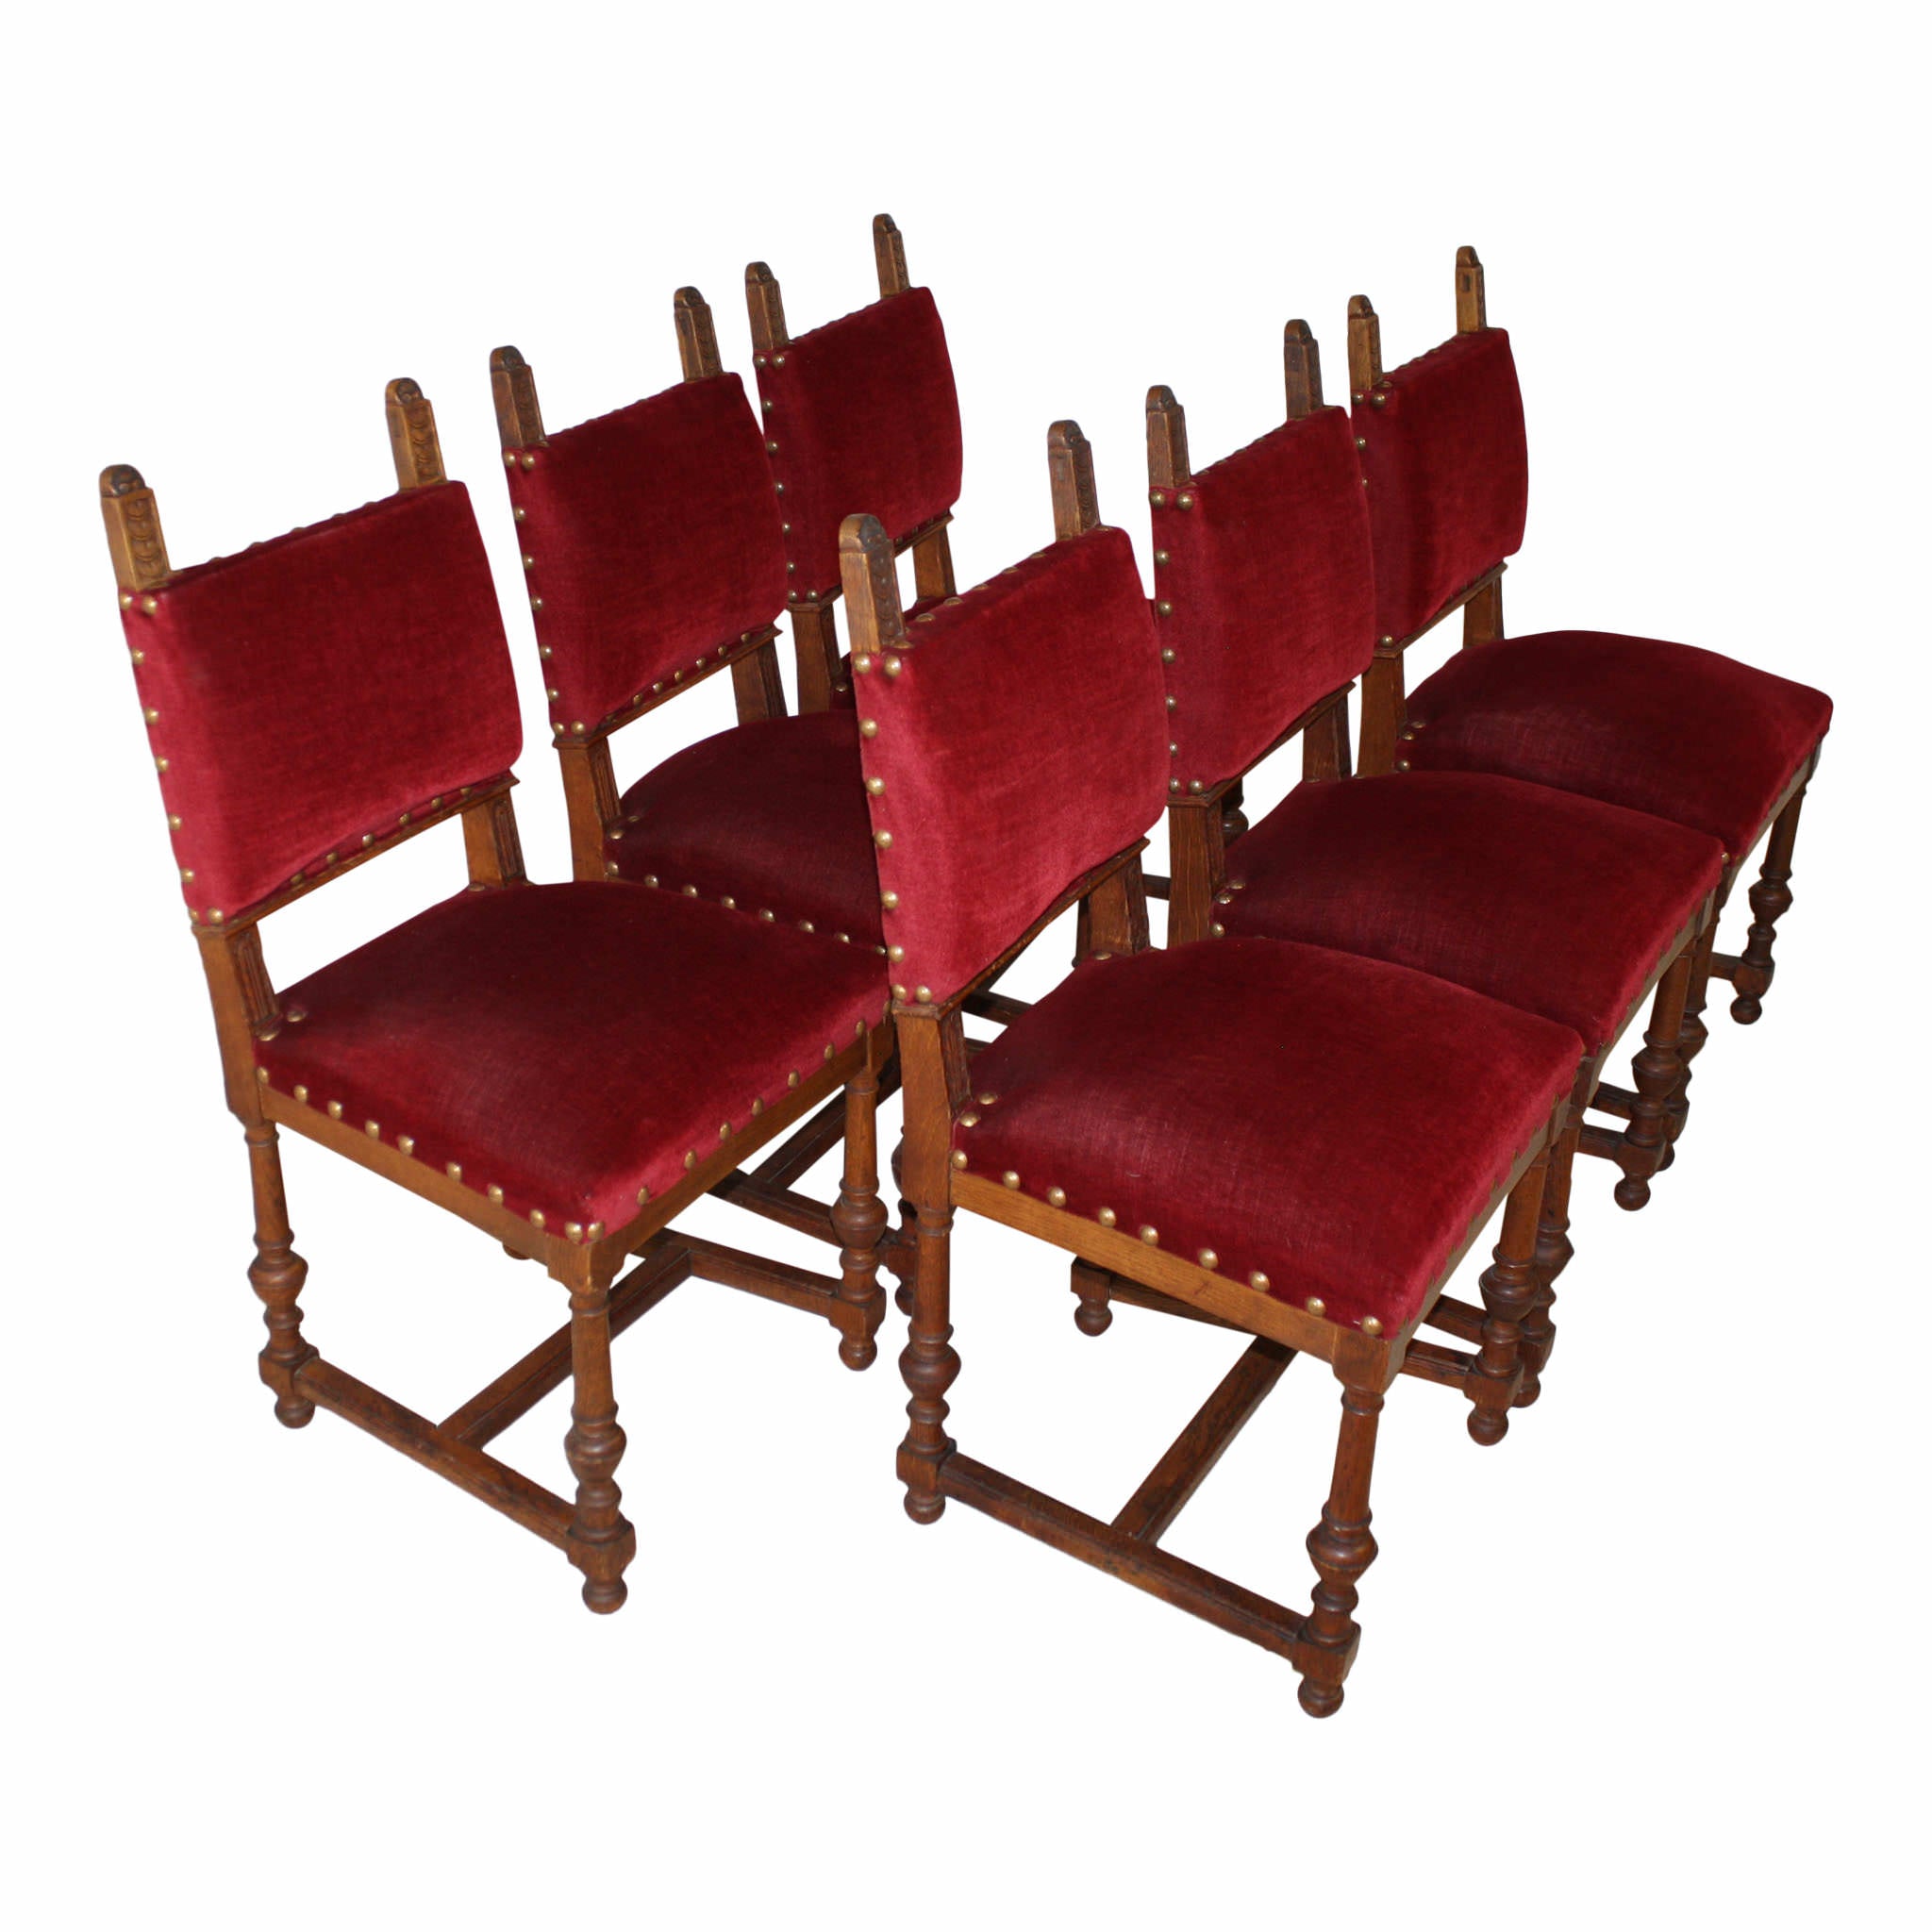 Carved Oak Chairs - Set of Six